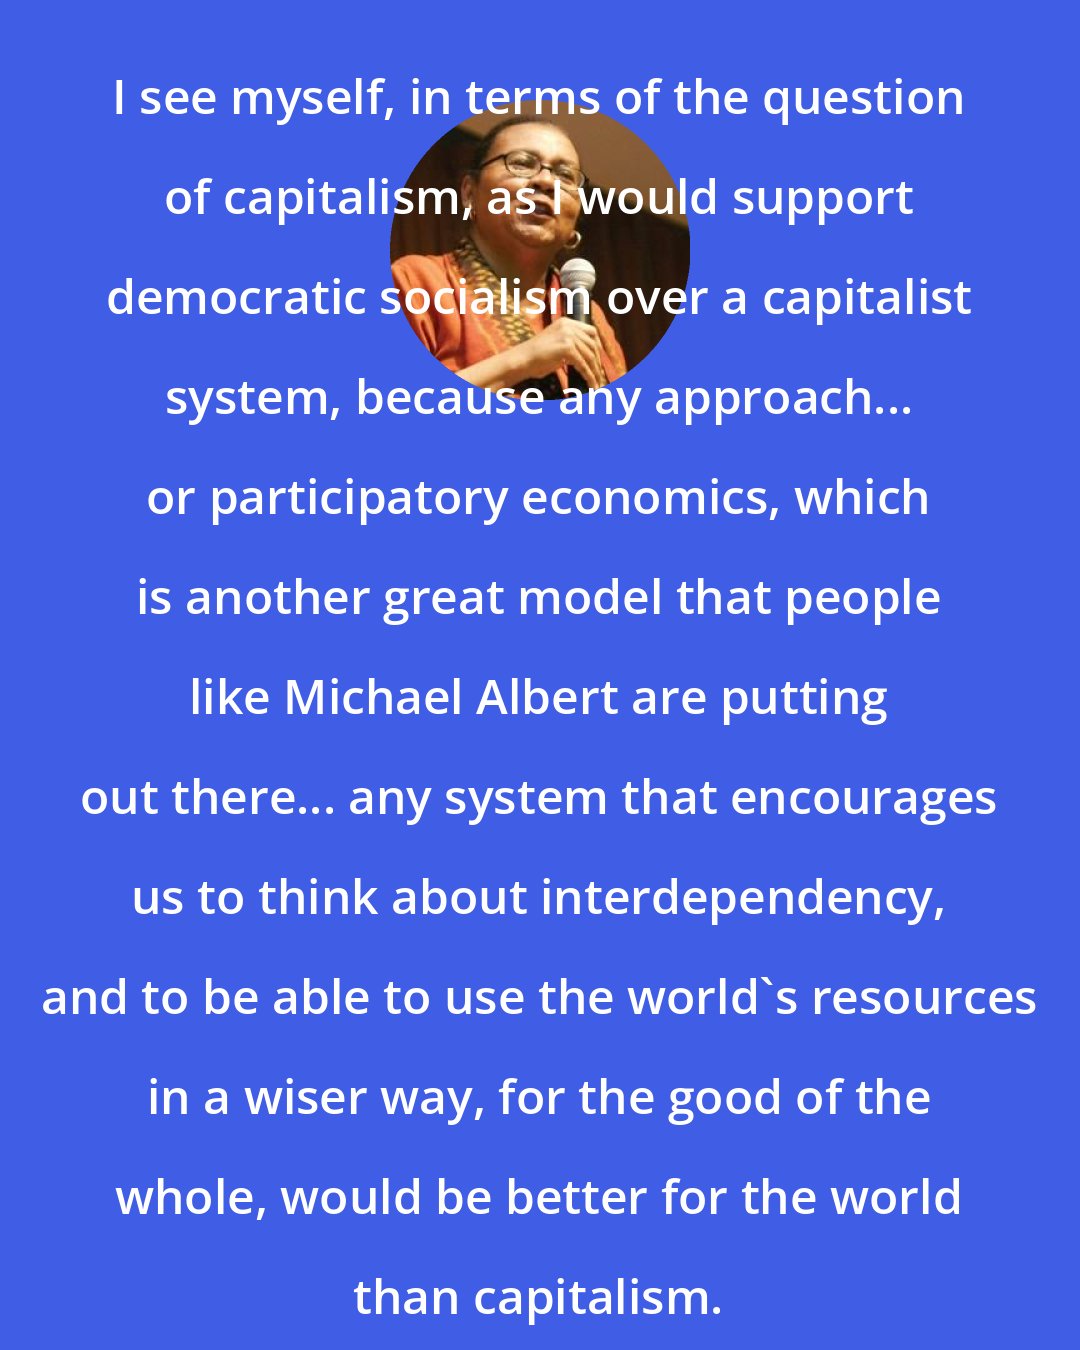 Bell Hooks: I see myself, in terms of the question of capitalism, as I would support democratic socialism over a capitalist system, because any approach... or participatory economics, which is another great model that people like Michael Albert are putting out there... any system that encourages us to think about interdependency, and to be able to use the world's resources in a wiser way, for the good of the whole, would be better for the world than capitalism.